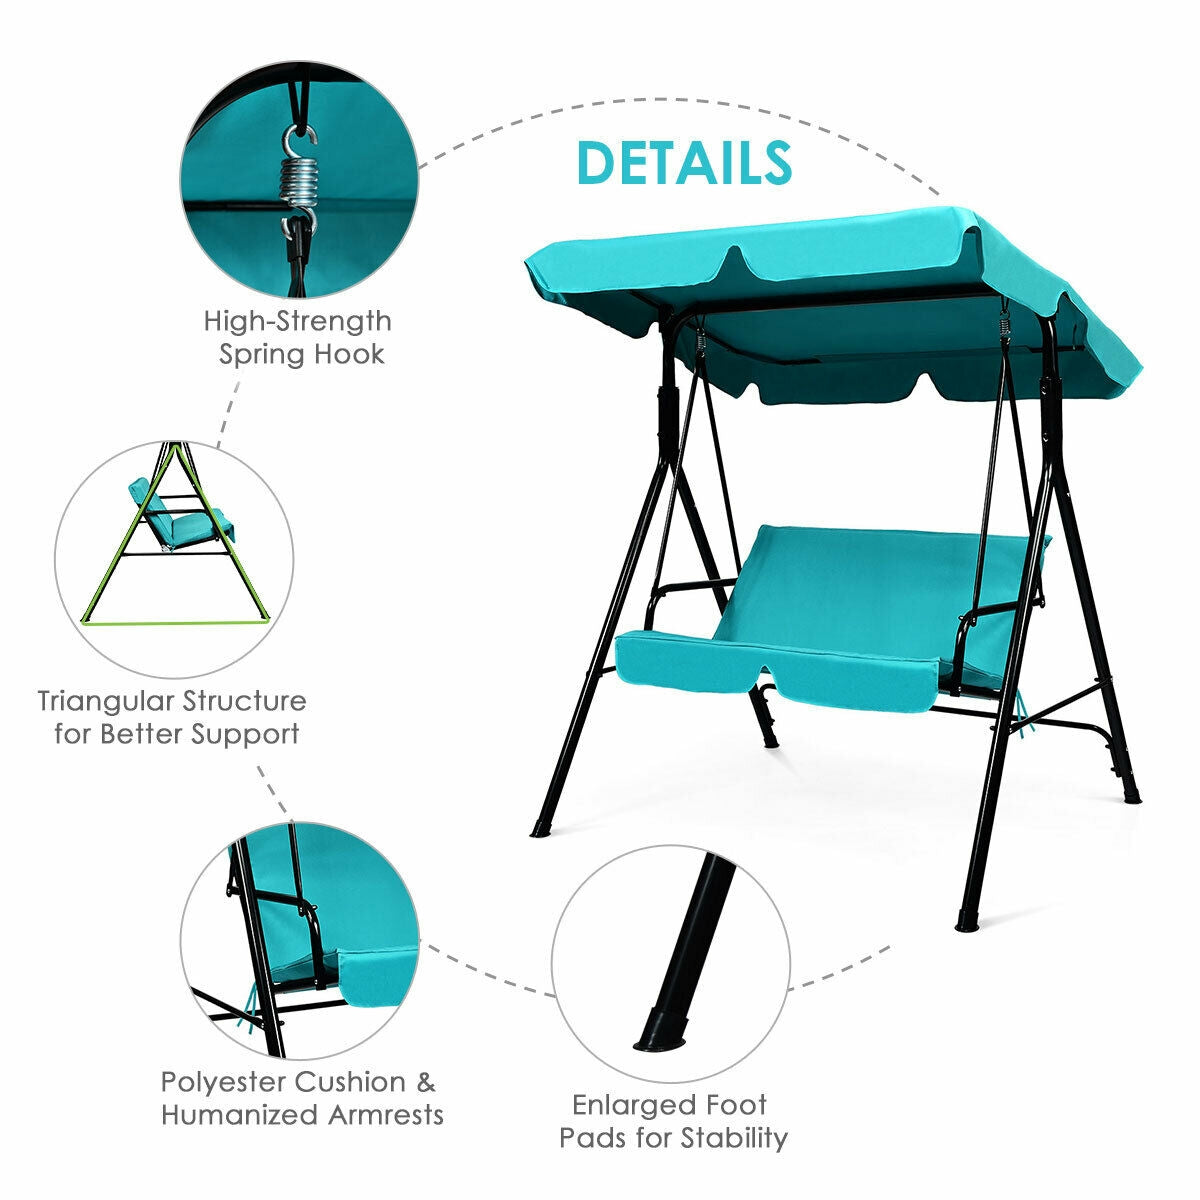 2-Person Weather Resistant Canopy Swing for Porch Garden Backyard Lawn